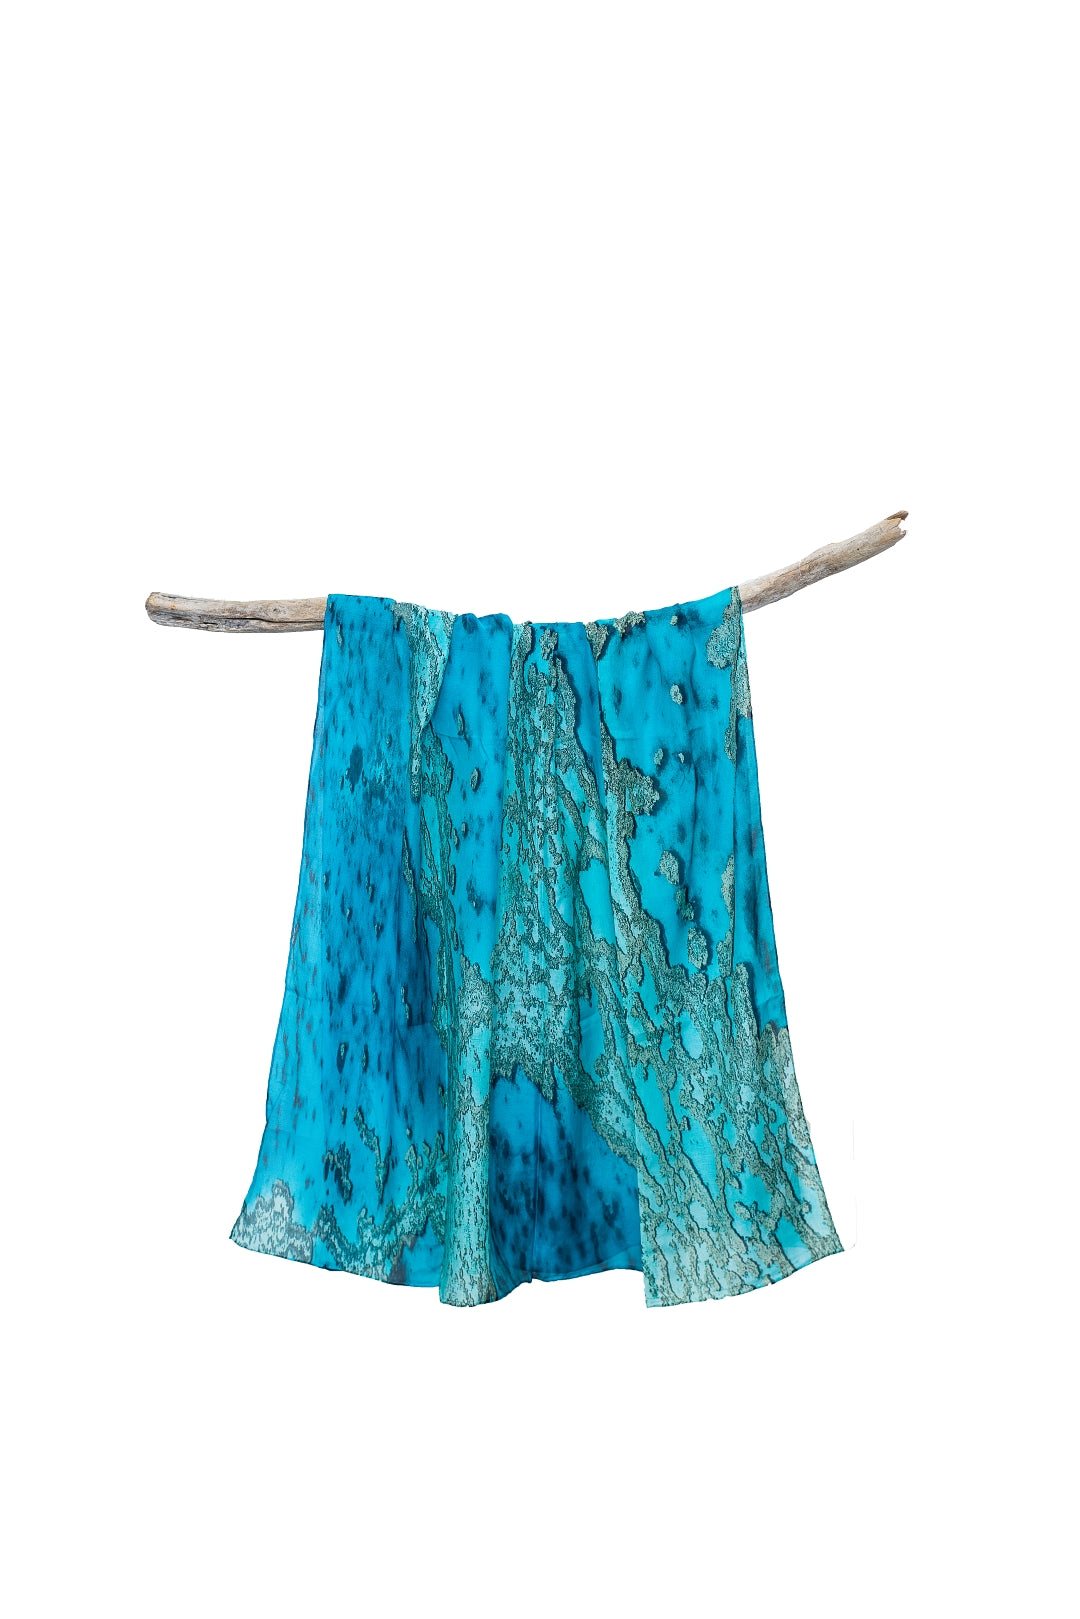 cotton silk sarong print of Coral reef veins spread across green, blue, aqua, turquise coloured water